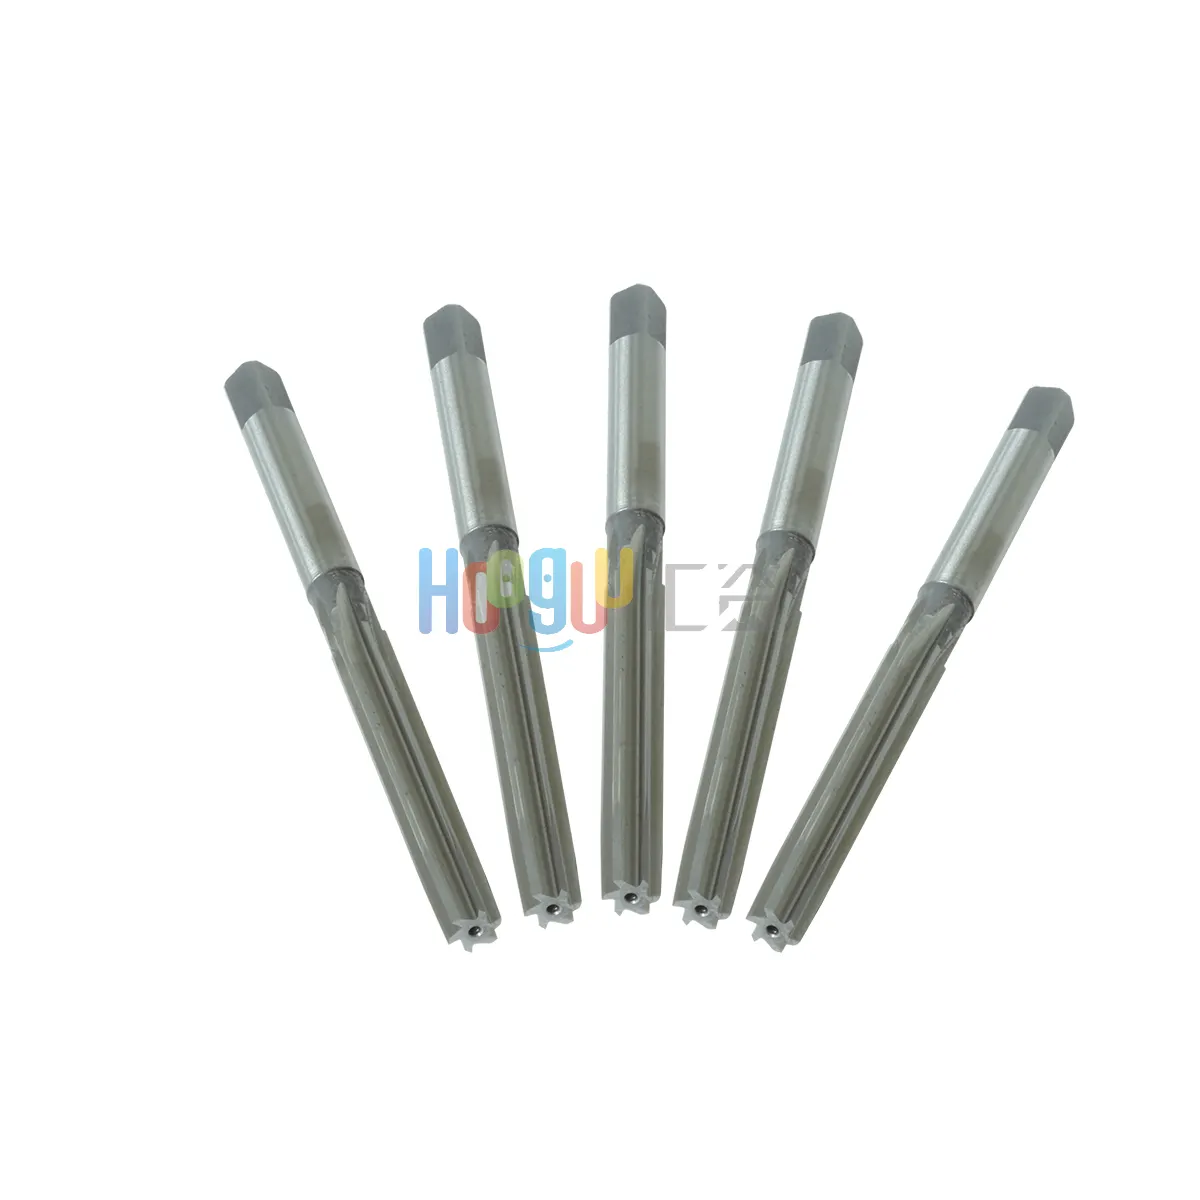 High precision HSS adjustable Reamer Chamber reamer Straight shank with 1.5mm 2mm 2.5mm inserts